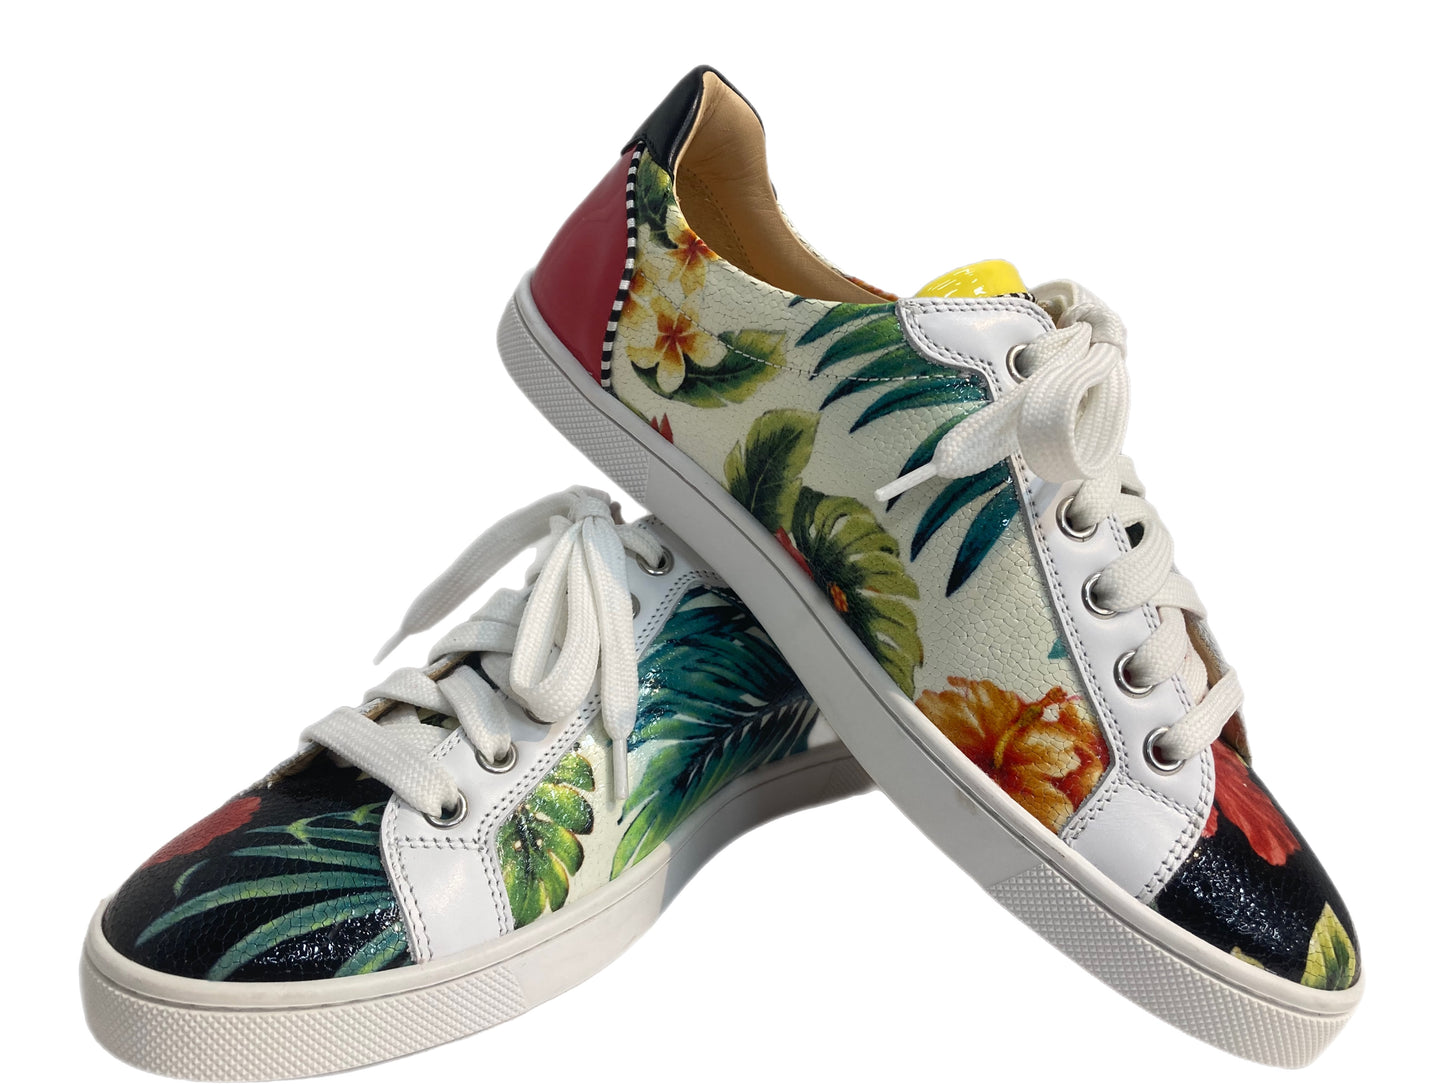 CHRISTIAN LOUBOUTIN Leather Floral Print Sneakers White Size 37.5